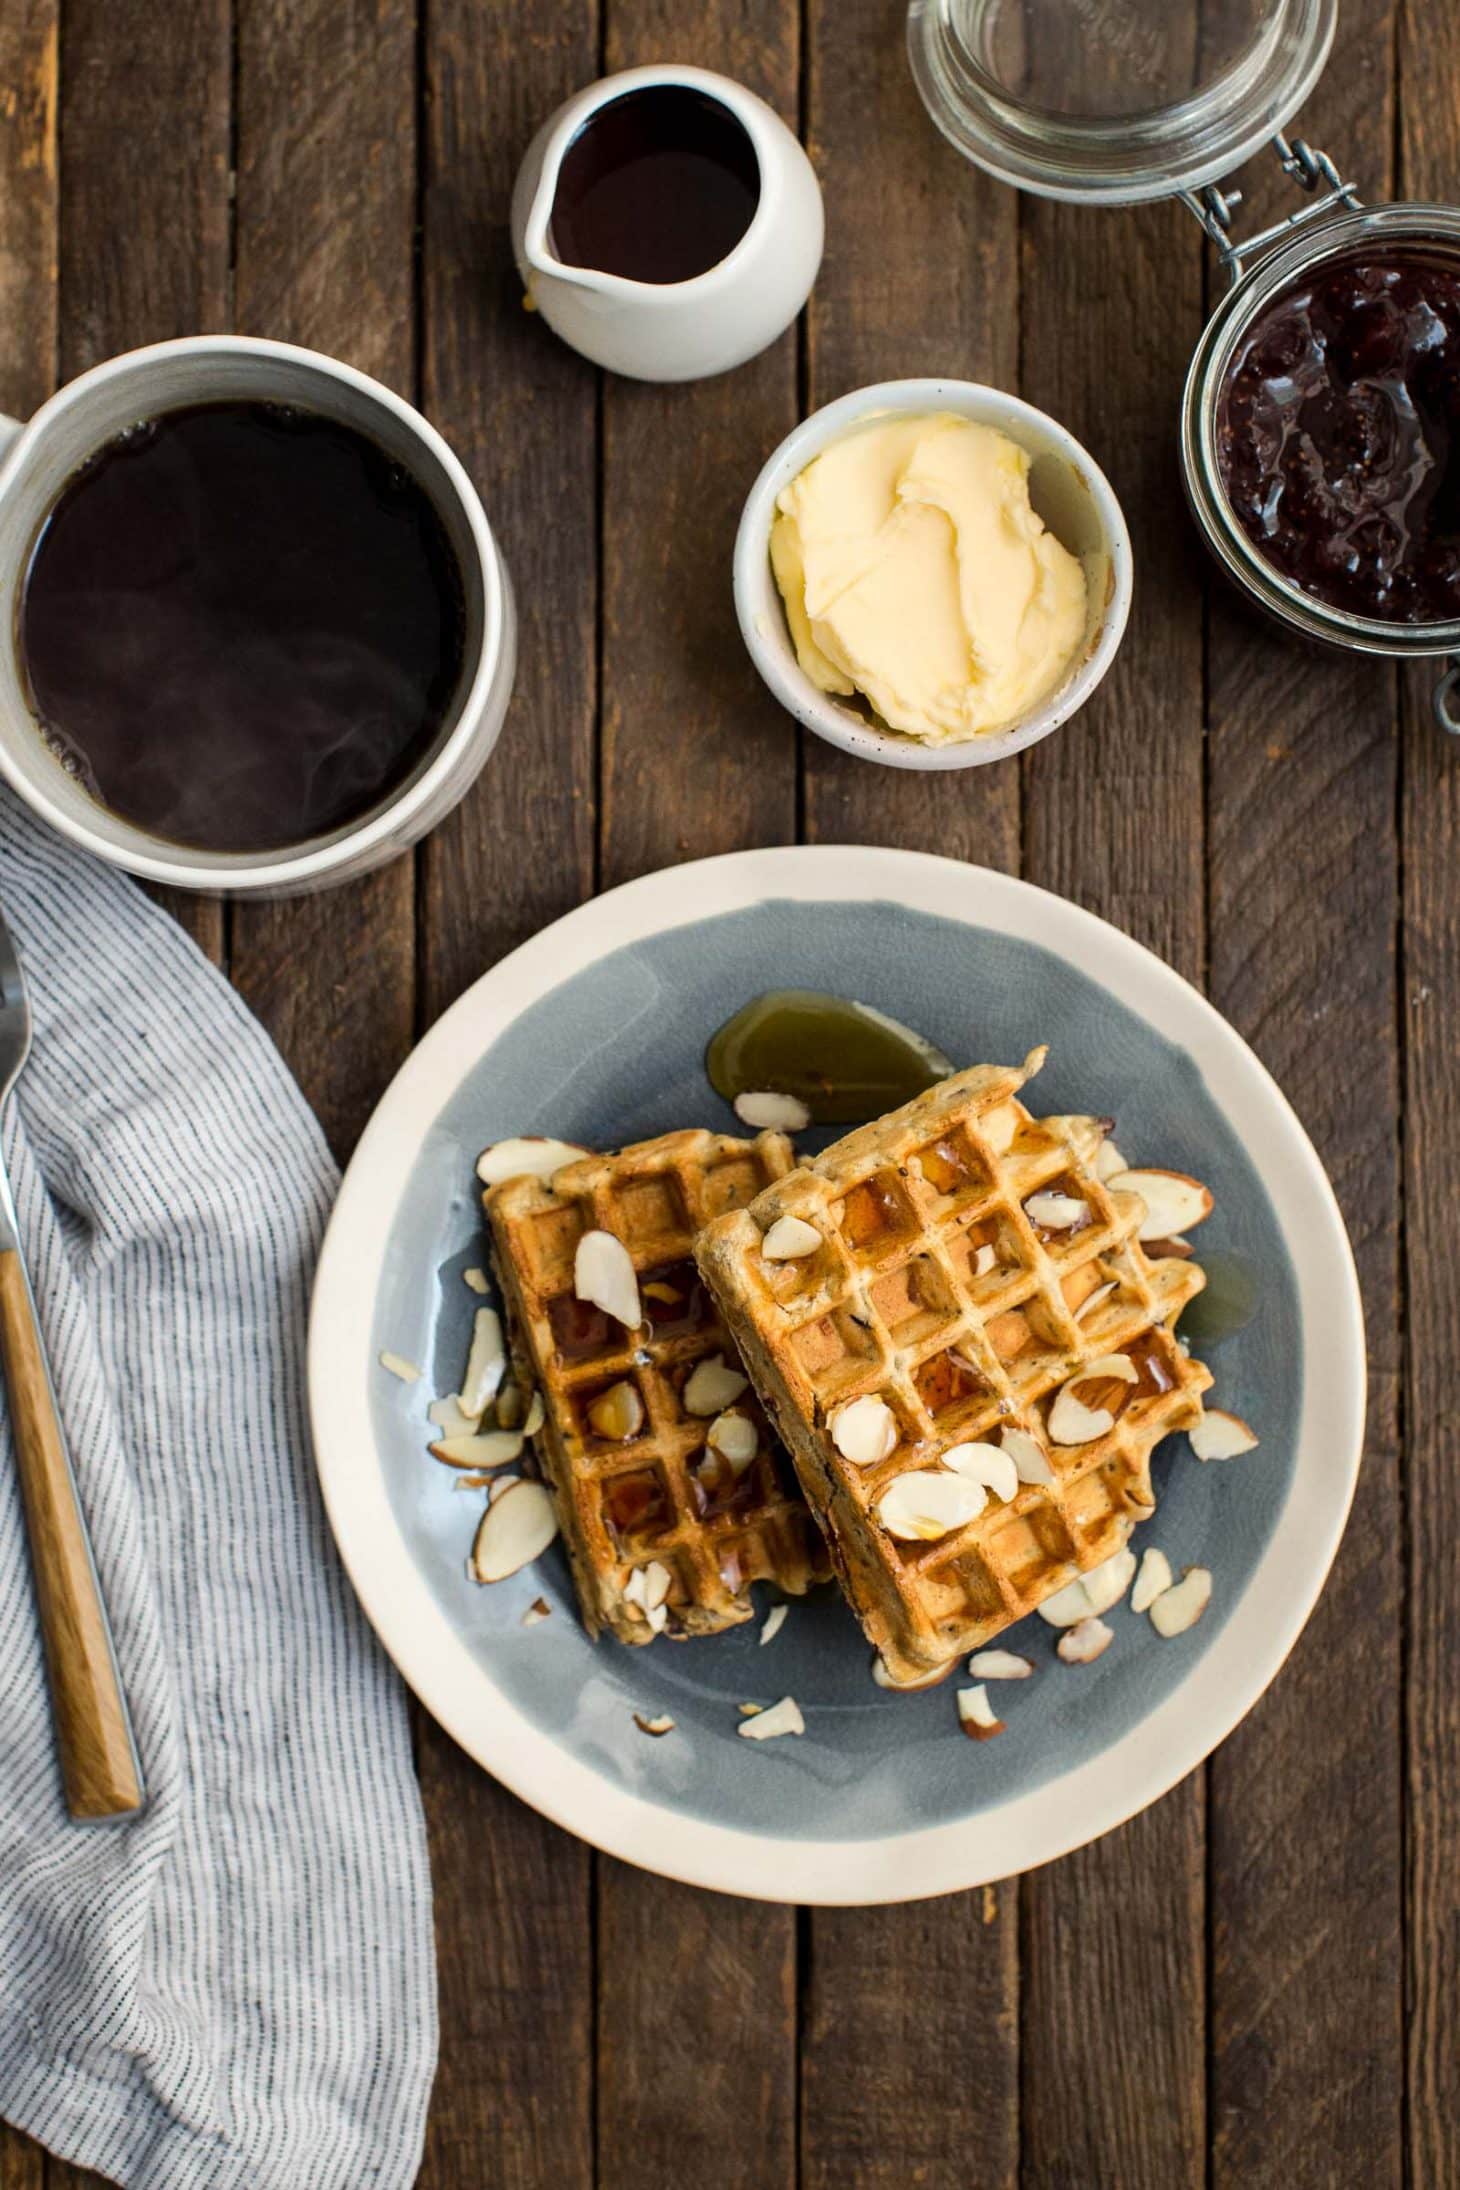 Vegan Carrot Waffles from the Love and Lemons Cookbook